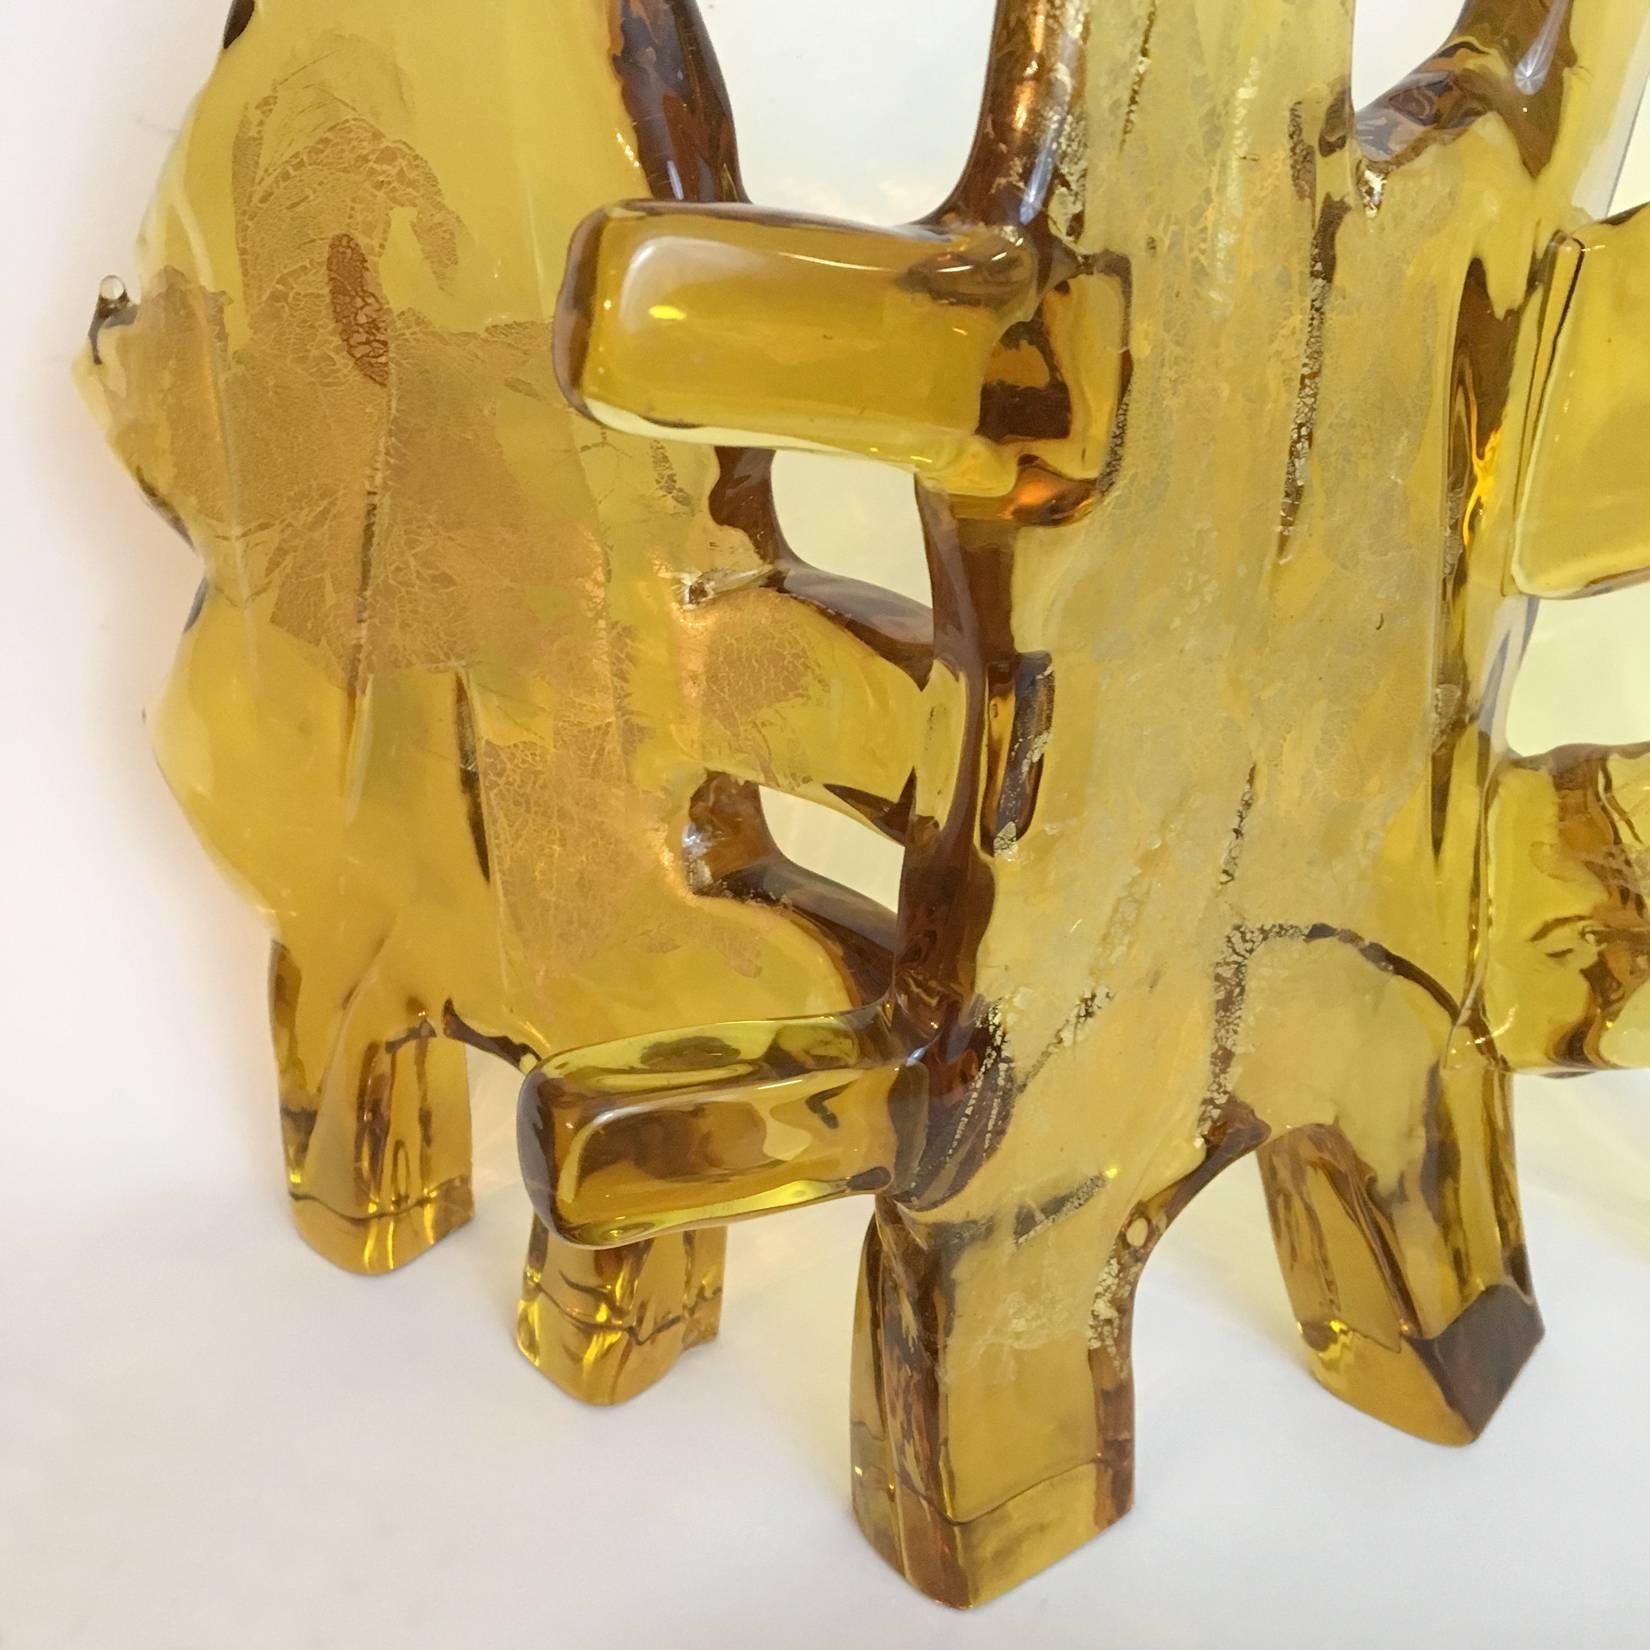 A large abstract sculpture in amber Murano glass with gold leaf inclusions. Three interlocking forms created by Luciano Gaspari for Salviati.